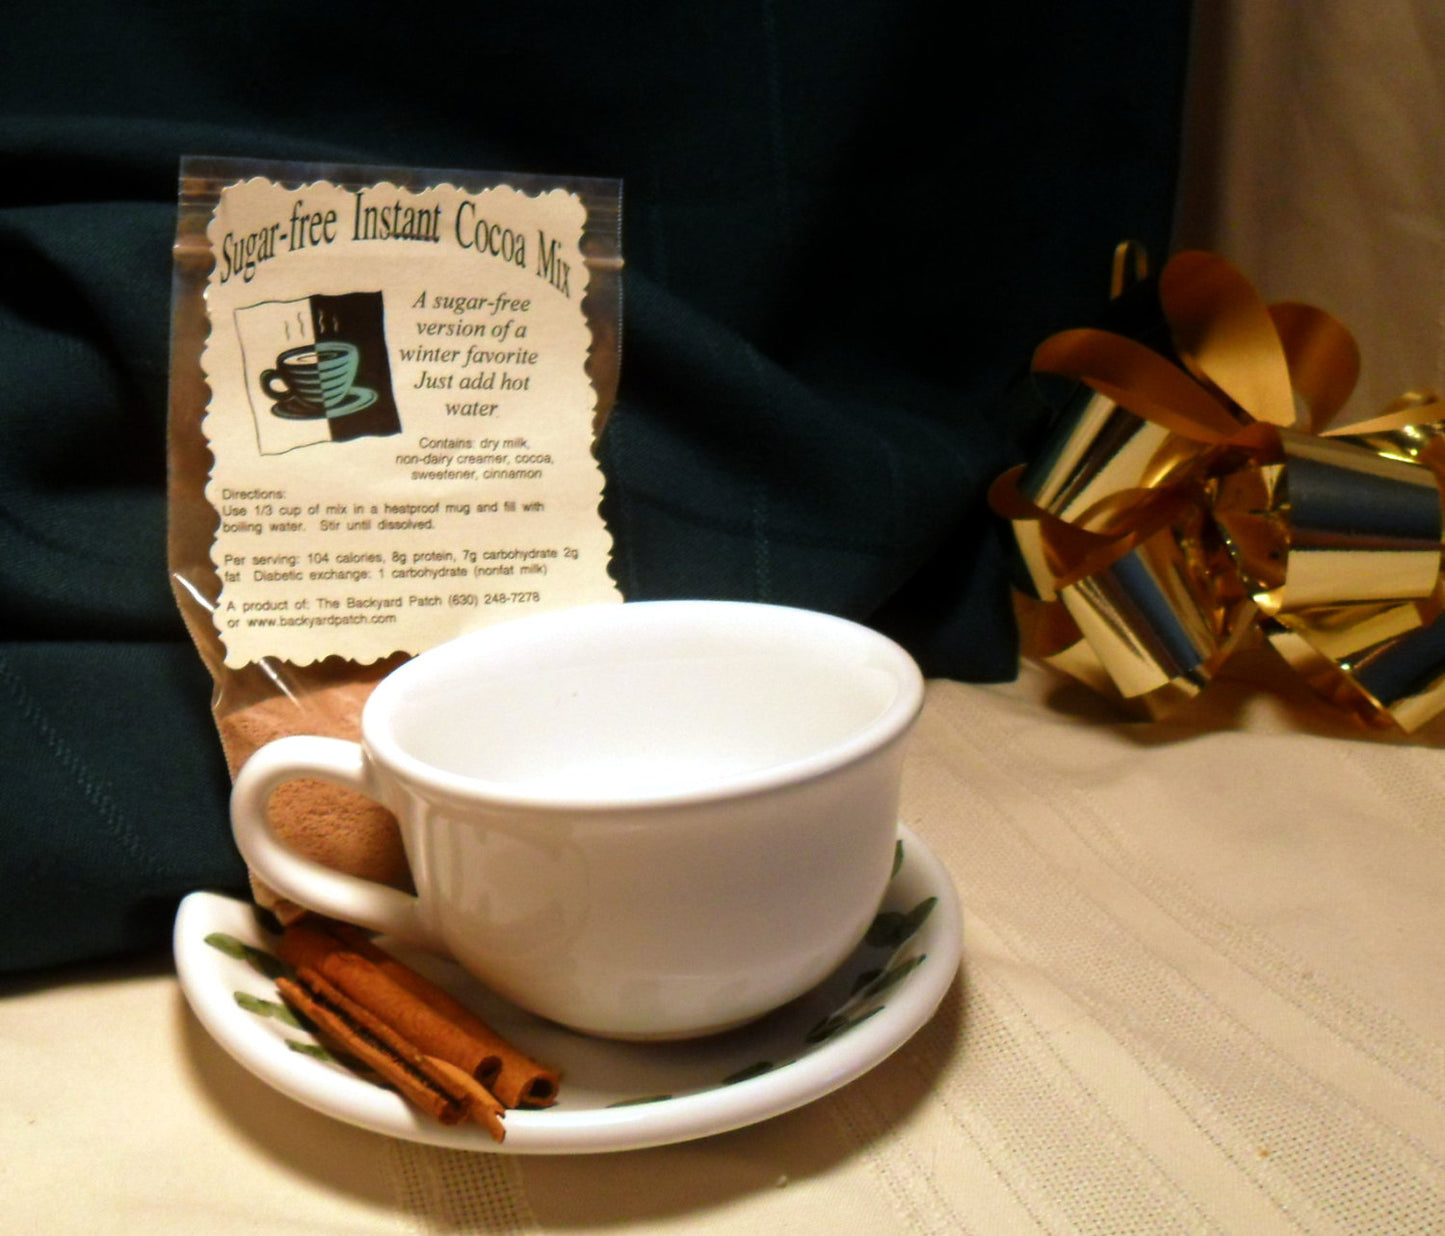 Instant Herbal Hot Chocolate - Cocoa Mixes, choose ONE of 5, cinnamon, nutmeg, allspice, cocoa, milk